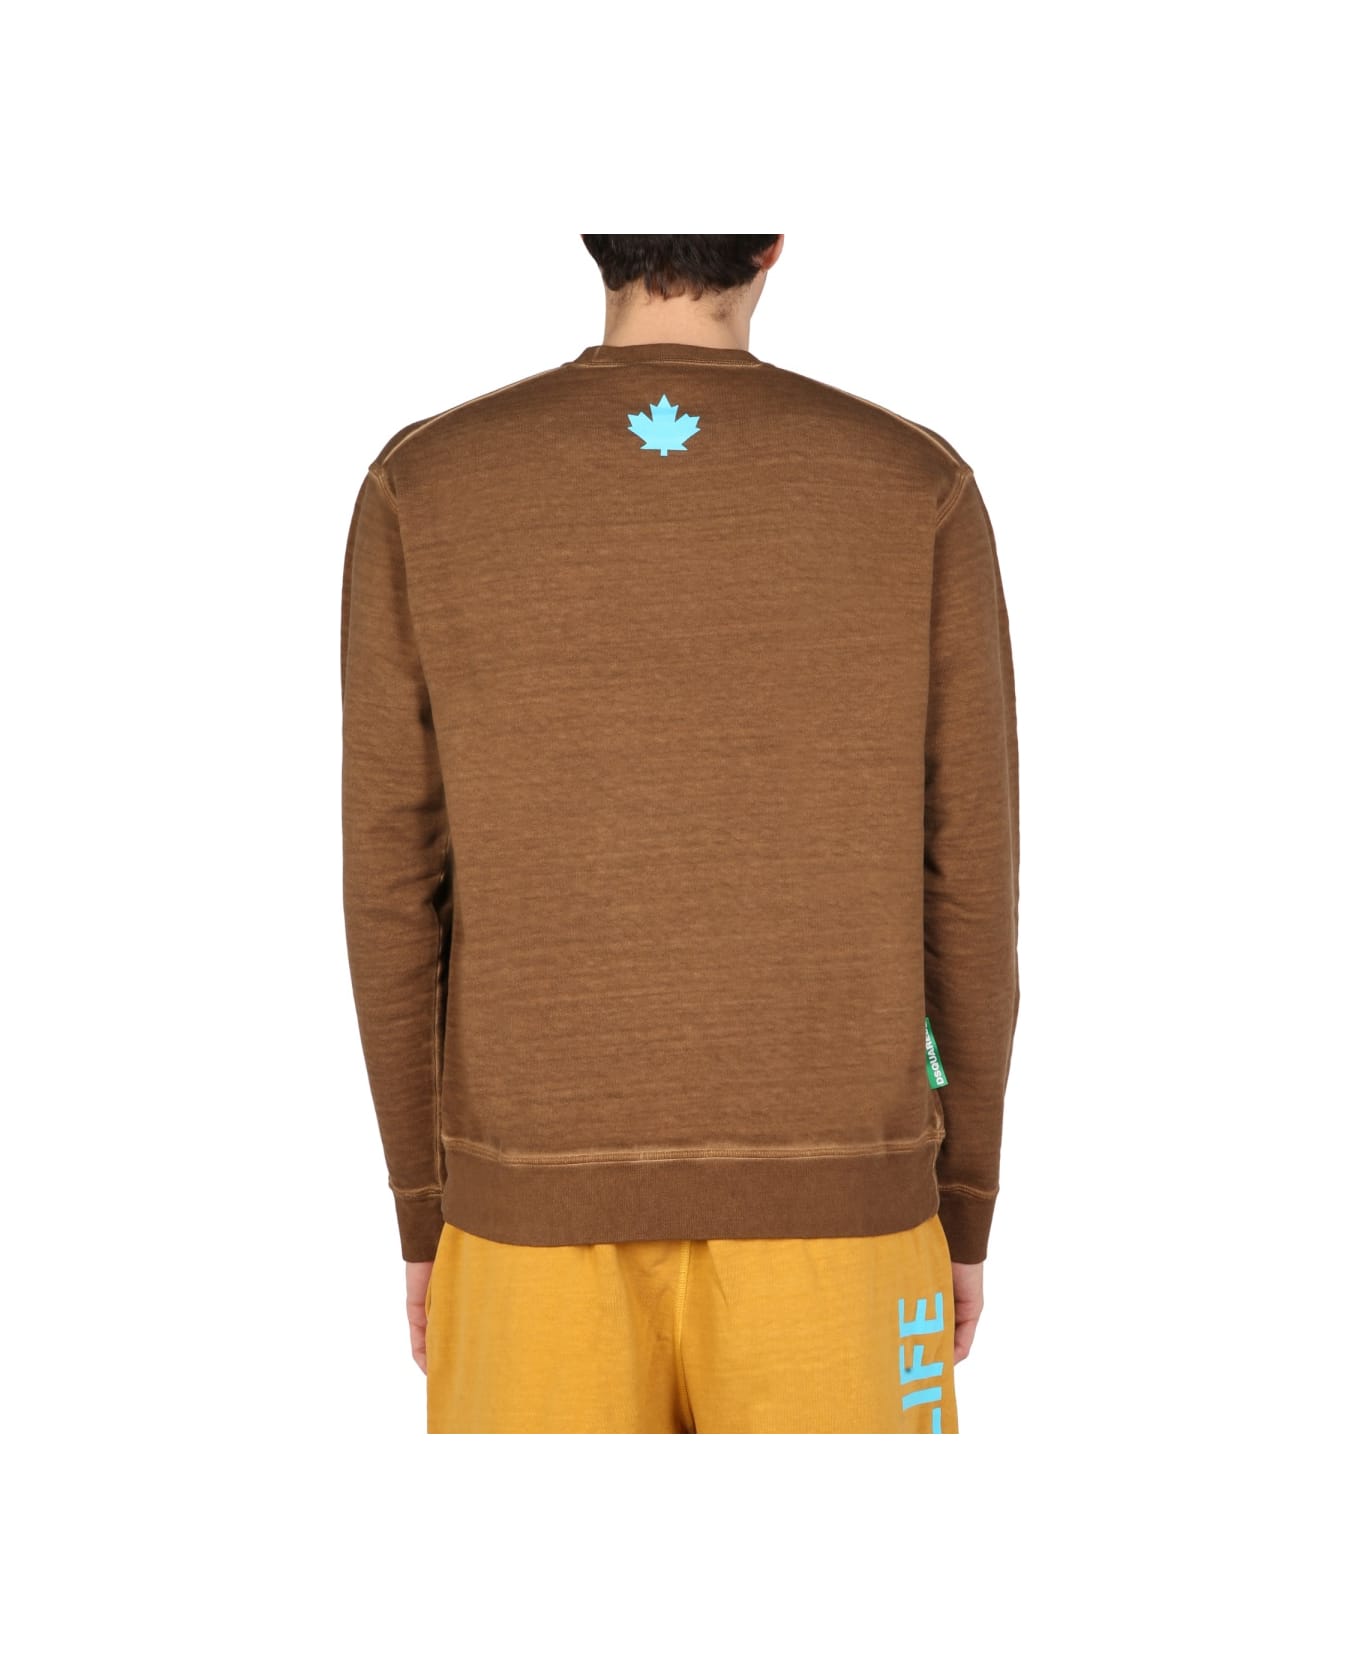 Dsquared2 "one Life One Planet" Sweatshirt - BROWN